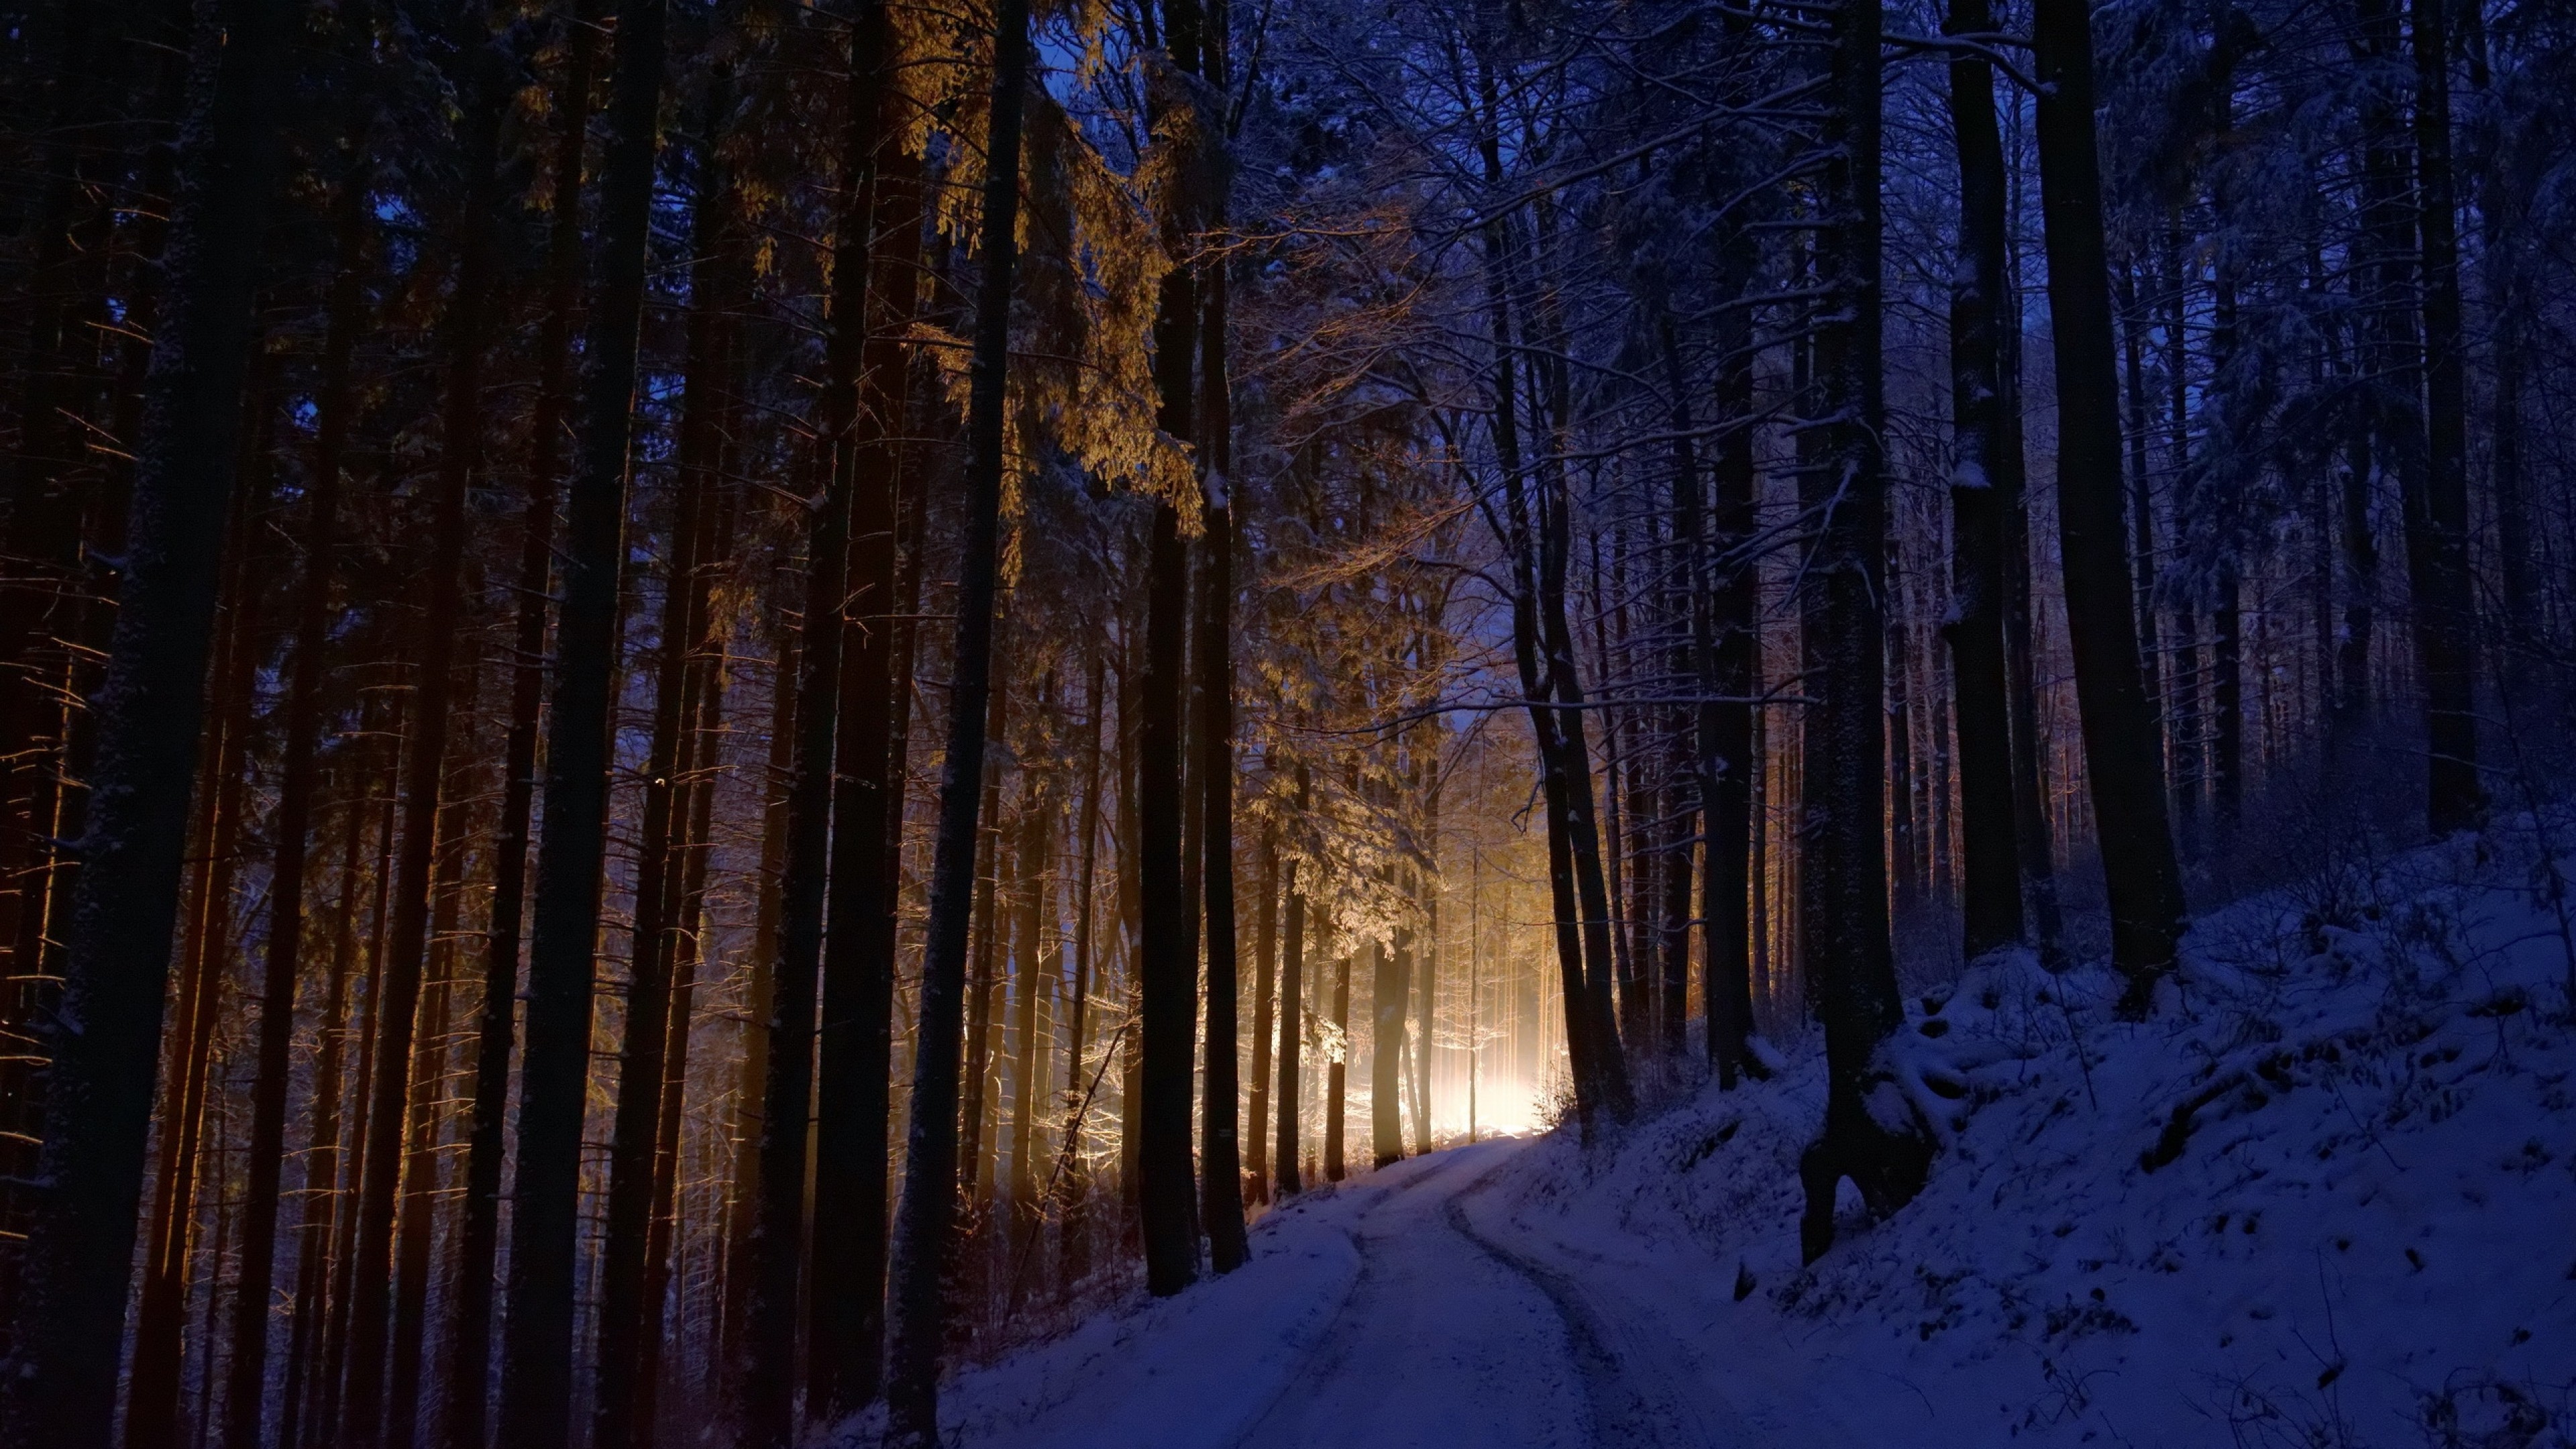 Download 3840x2160 Forest, Light, Winter, Trees, Path, Snow, Road